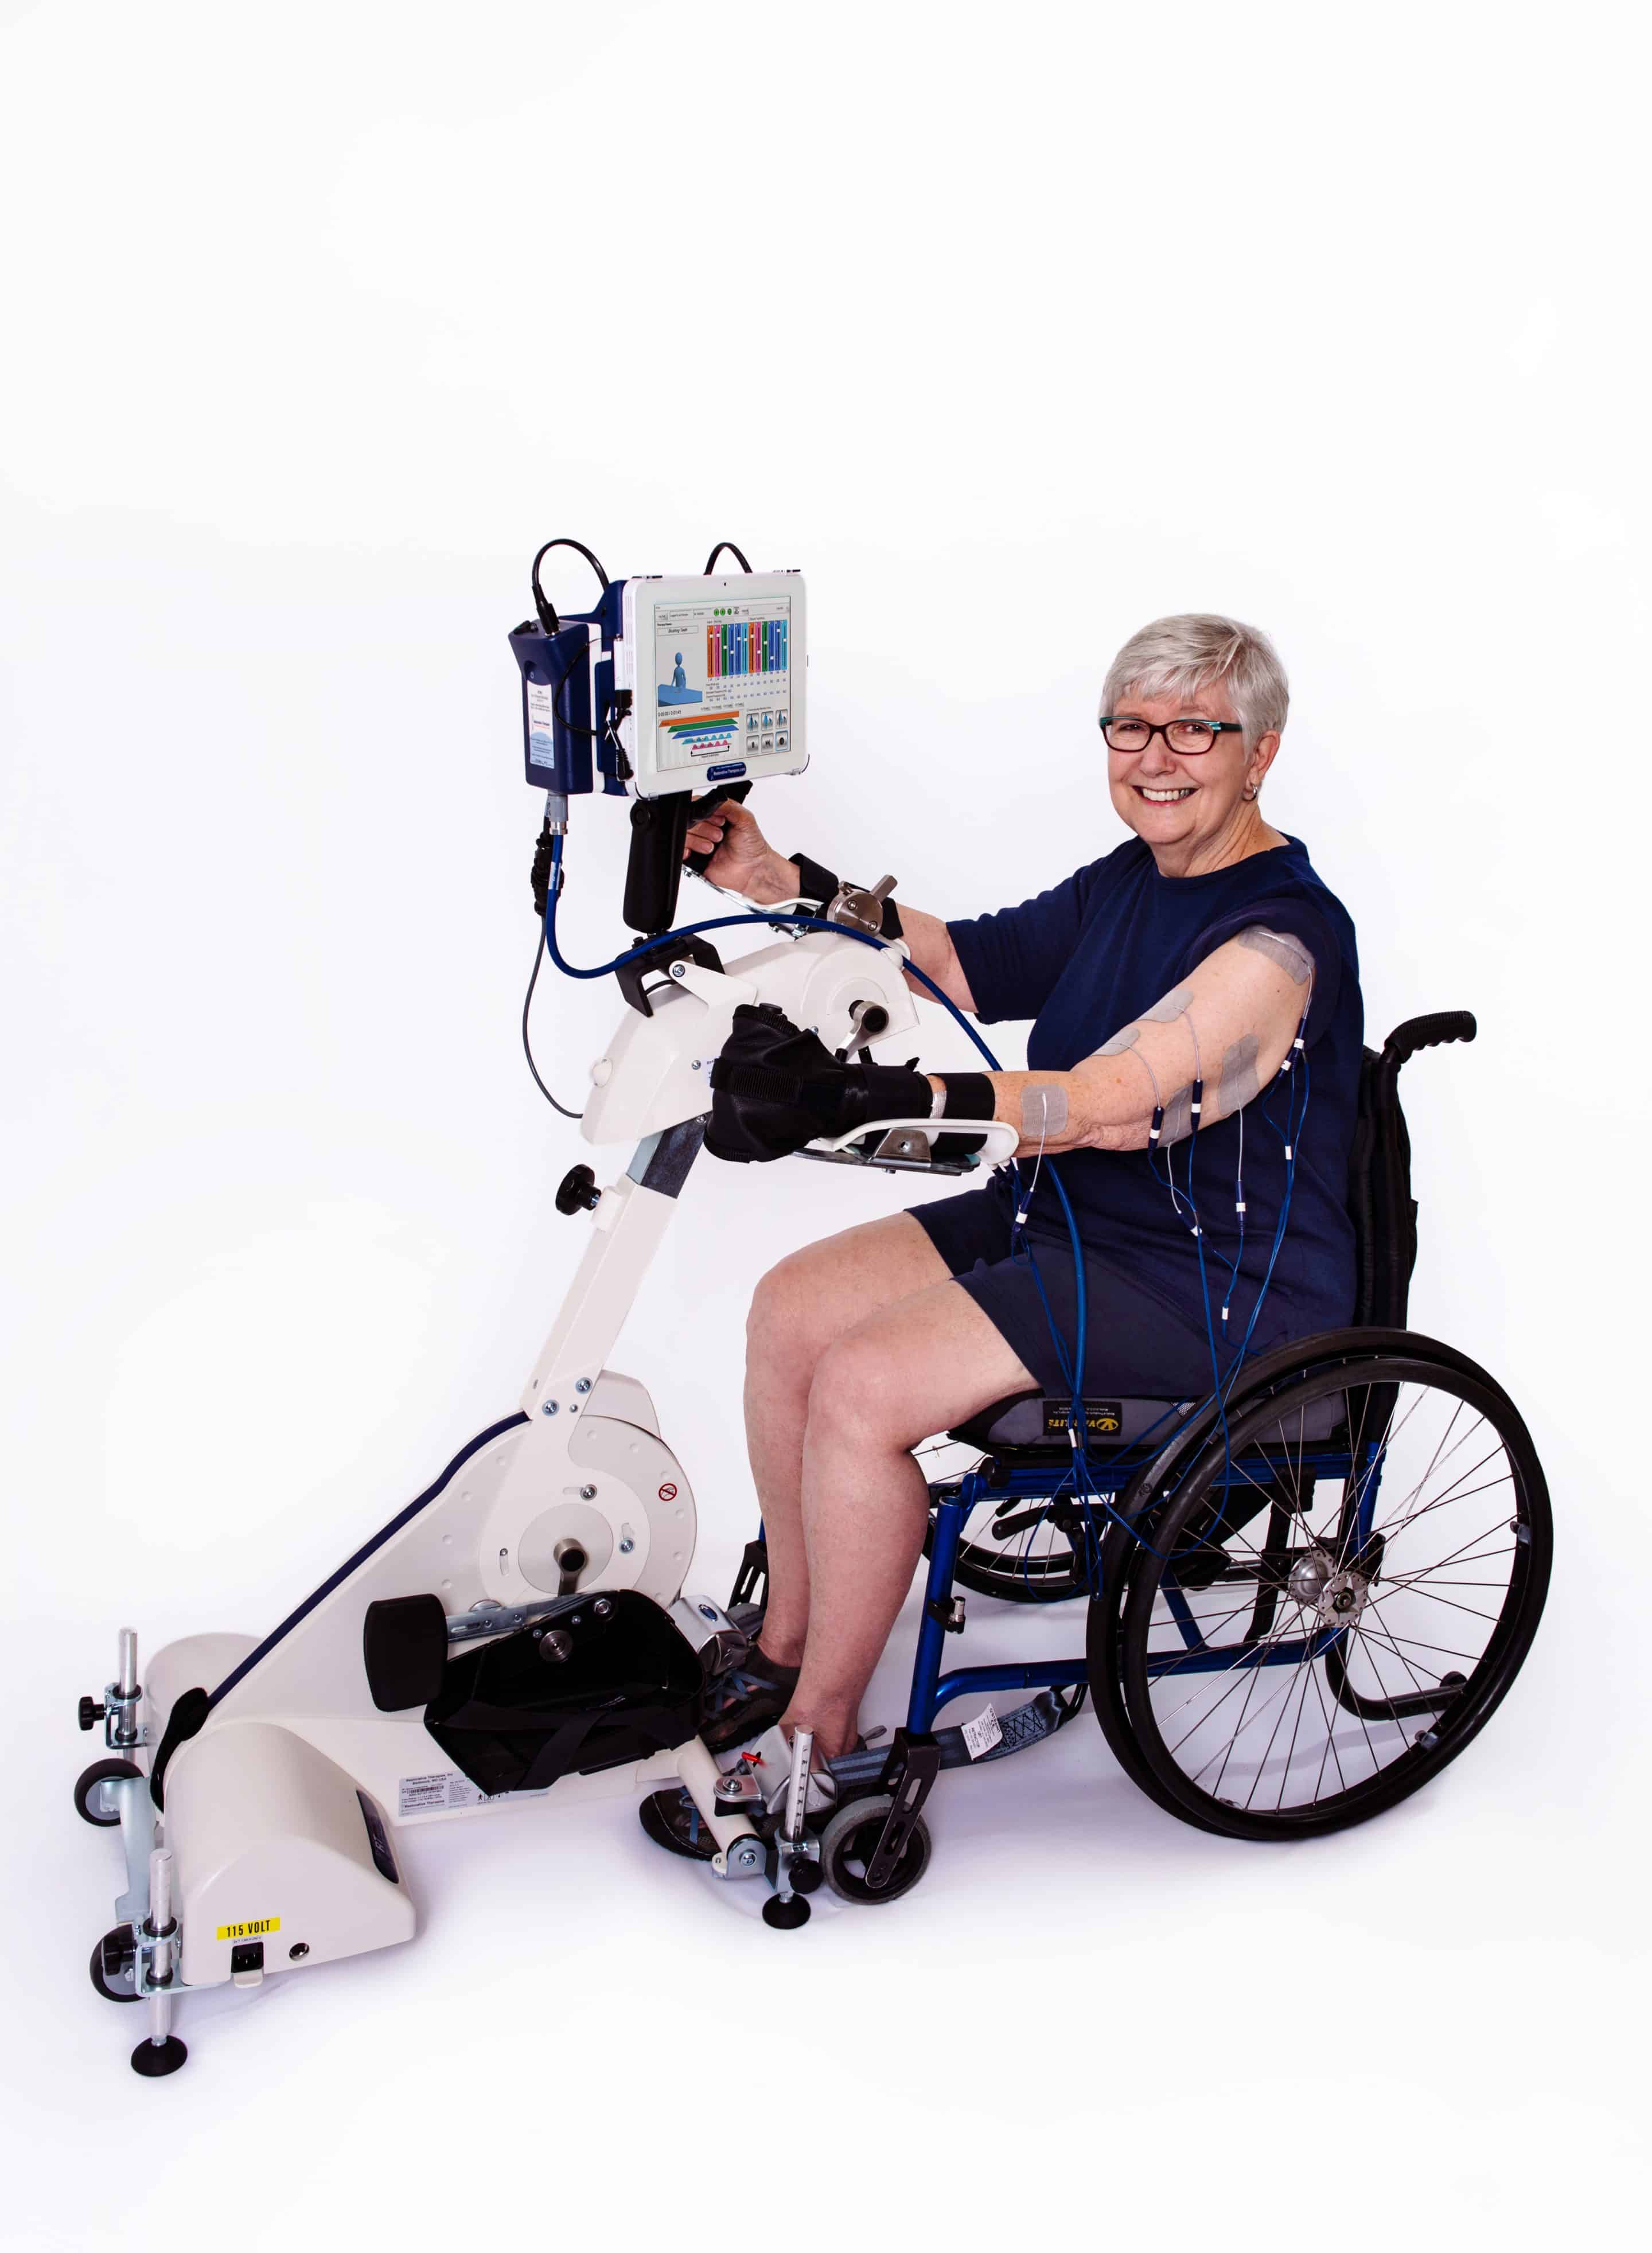 The benefits of FES Cycling for Spinal Cord Injury (SCI) patients